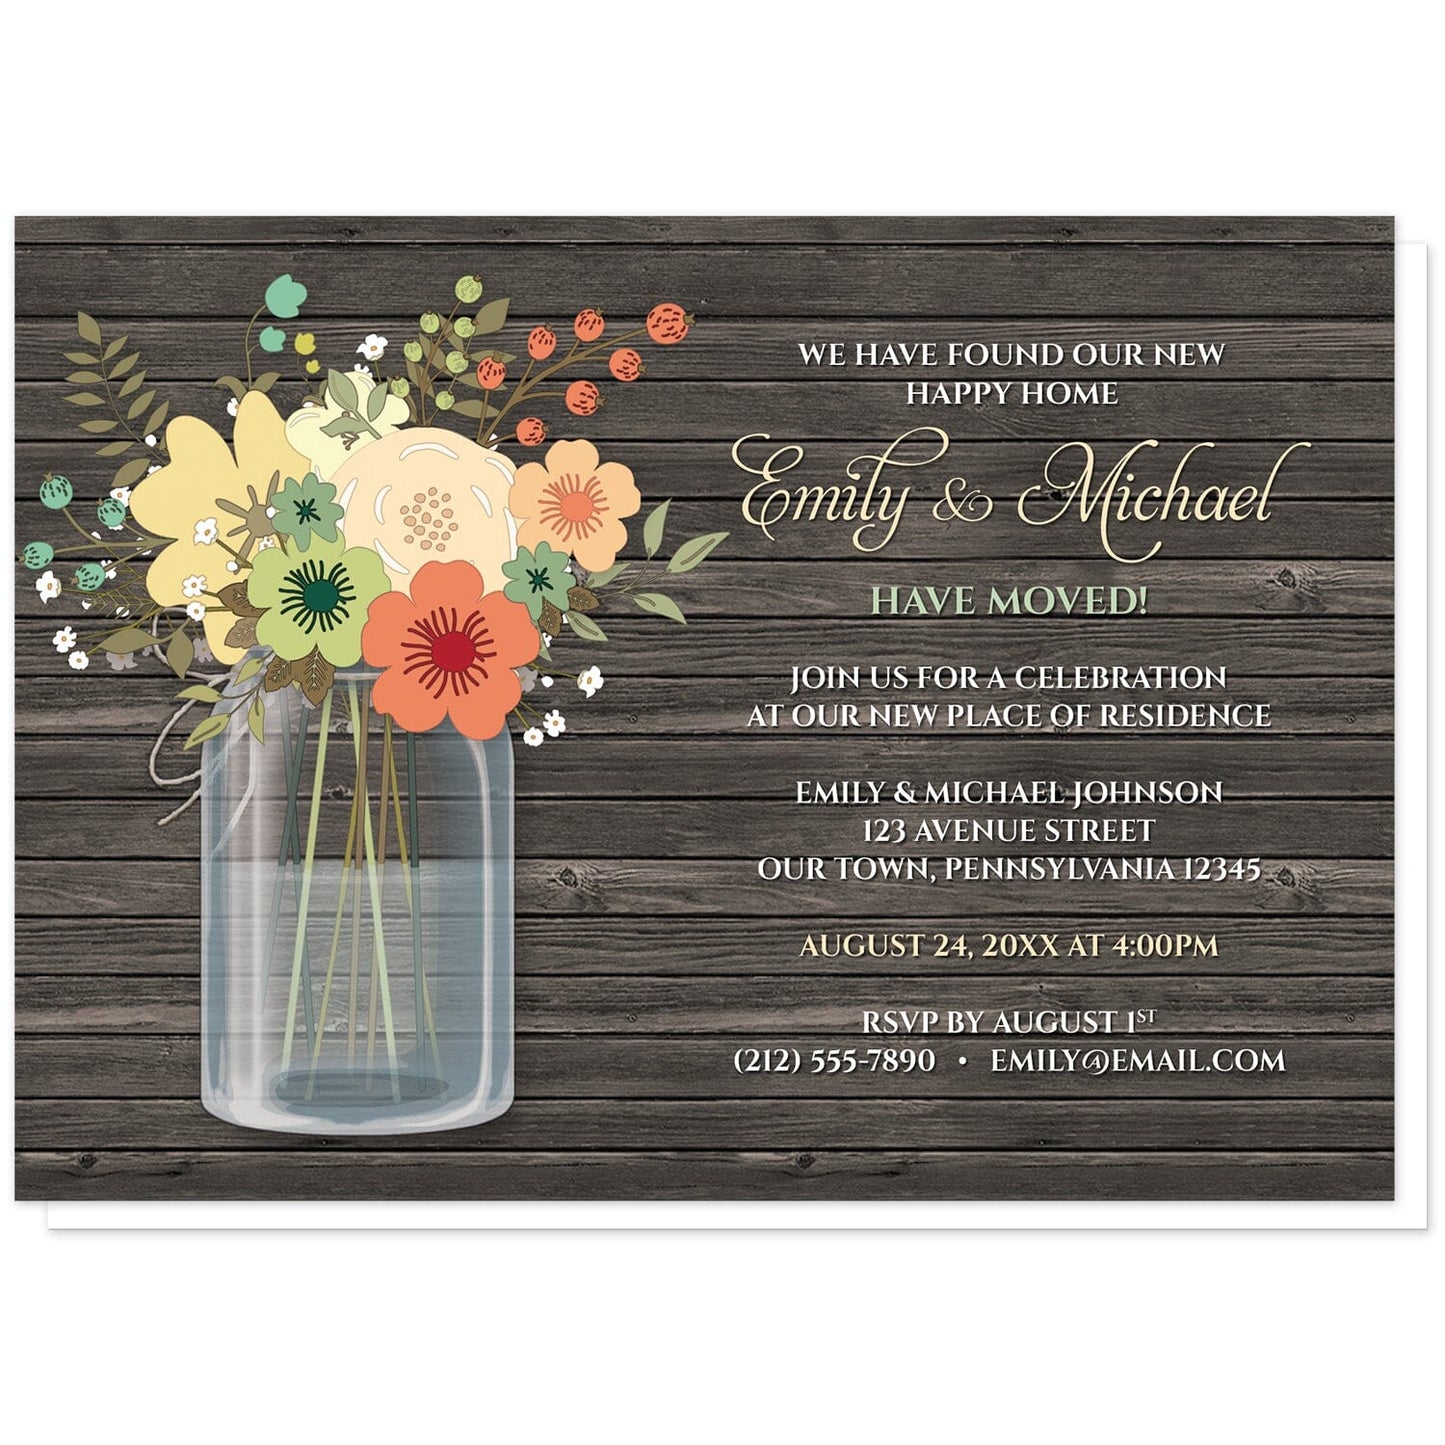 Rustic Floral Wood Mason Jar Housewarming Invitations at Artistically Invited. Beautiful rustic floral wood mason jar housewarming invitations with a pretty orange and teal floral mason jar theme with yellow, beige, and green accent flowers. Your personalized housewarming celebration details are custom printed in beige, green, and white over a dark brown rustic wood pattern background next to the mason jar illustration, in both script and all-capital letters fonts.